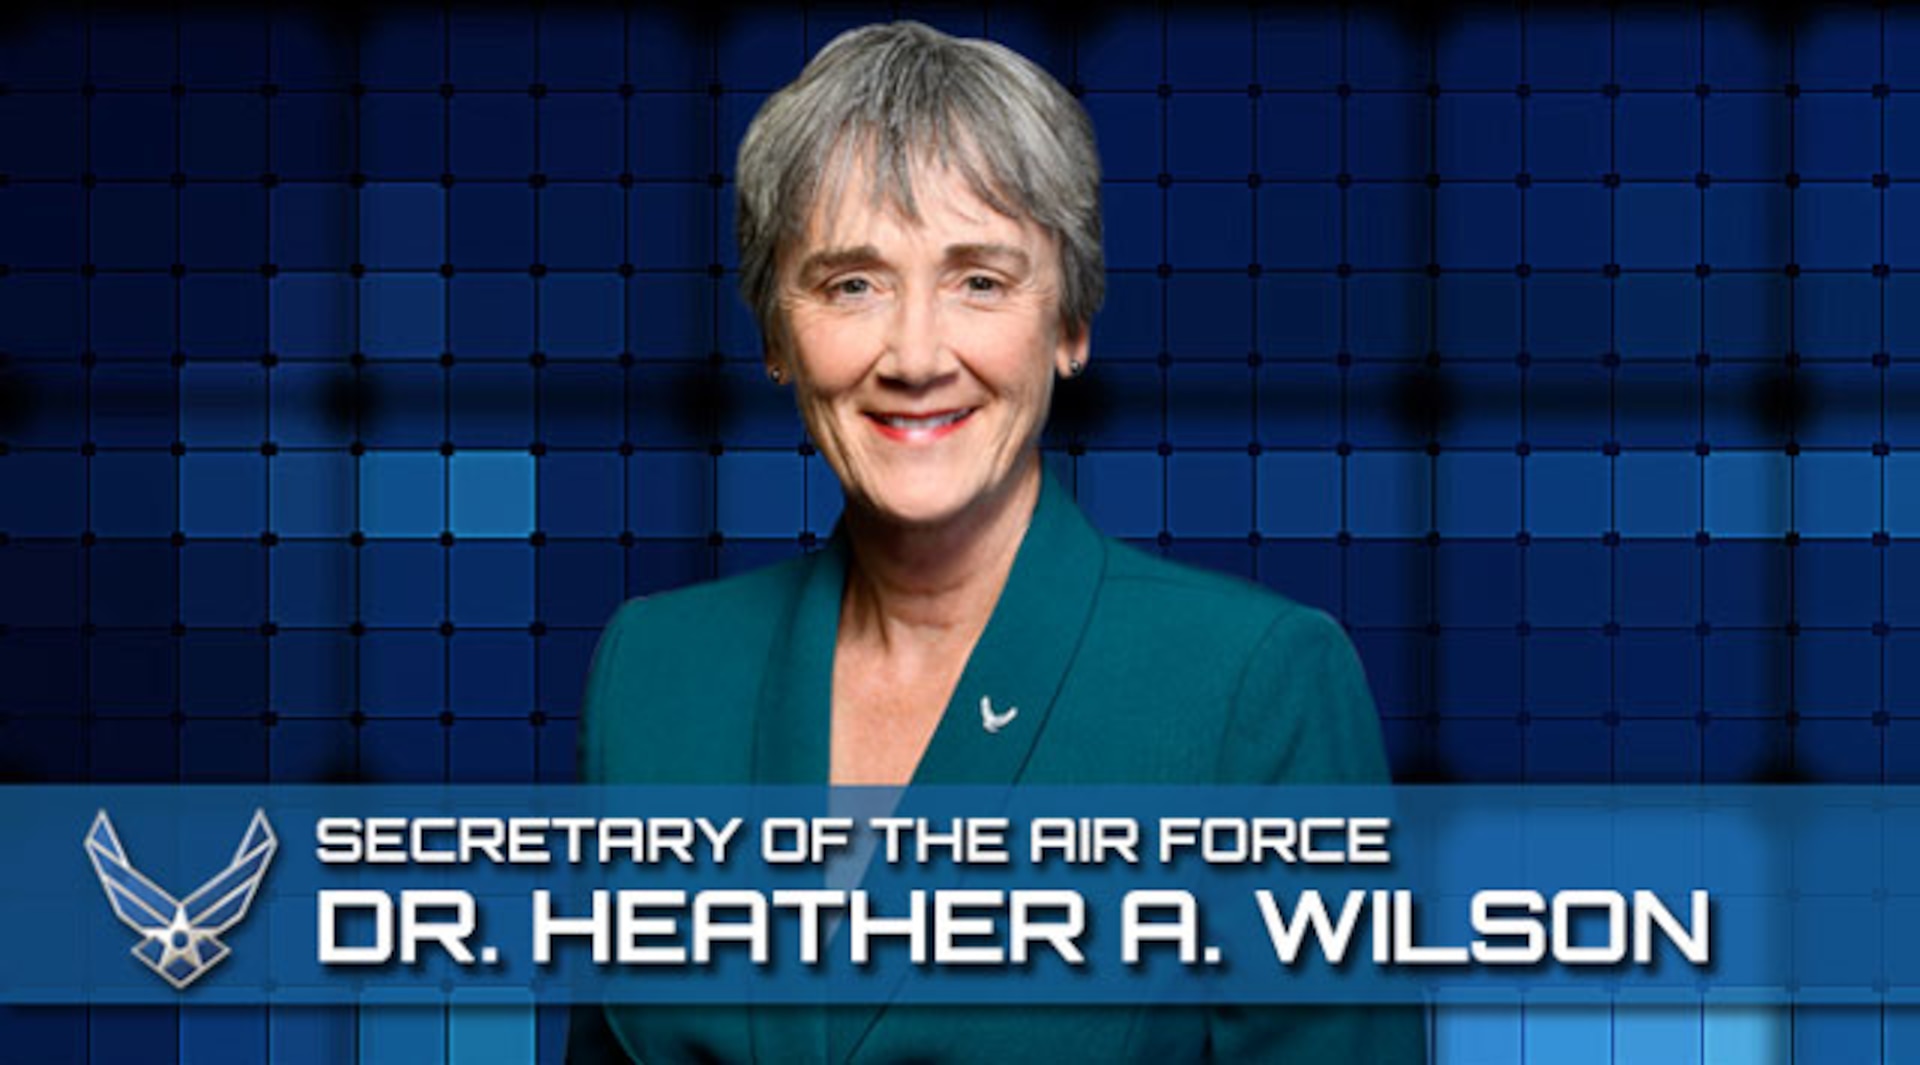 Dr. Heather A. Wilson is the Secretary of the Air Force, Washington, D.C. She was confirmed as the 24th Secretary of the Air Force May 12. She is responsible for the affairs of the Department of the Air Force, including organizing, training, equipping and providing for the welfare of its more than 660,000 active-duty, Guard, Reserve and civilian Airmen and their families.